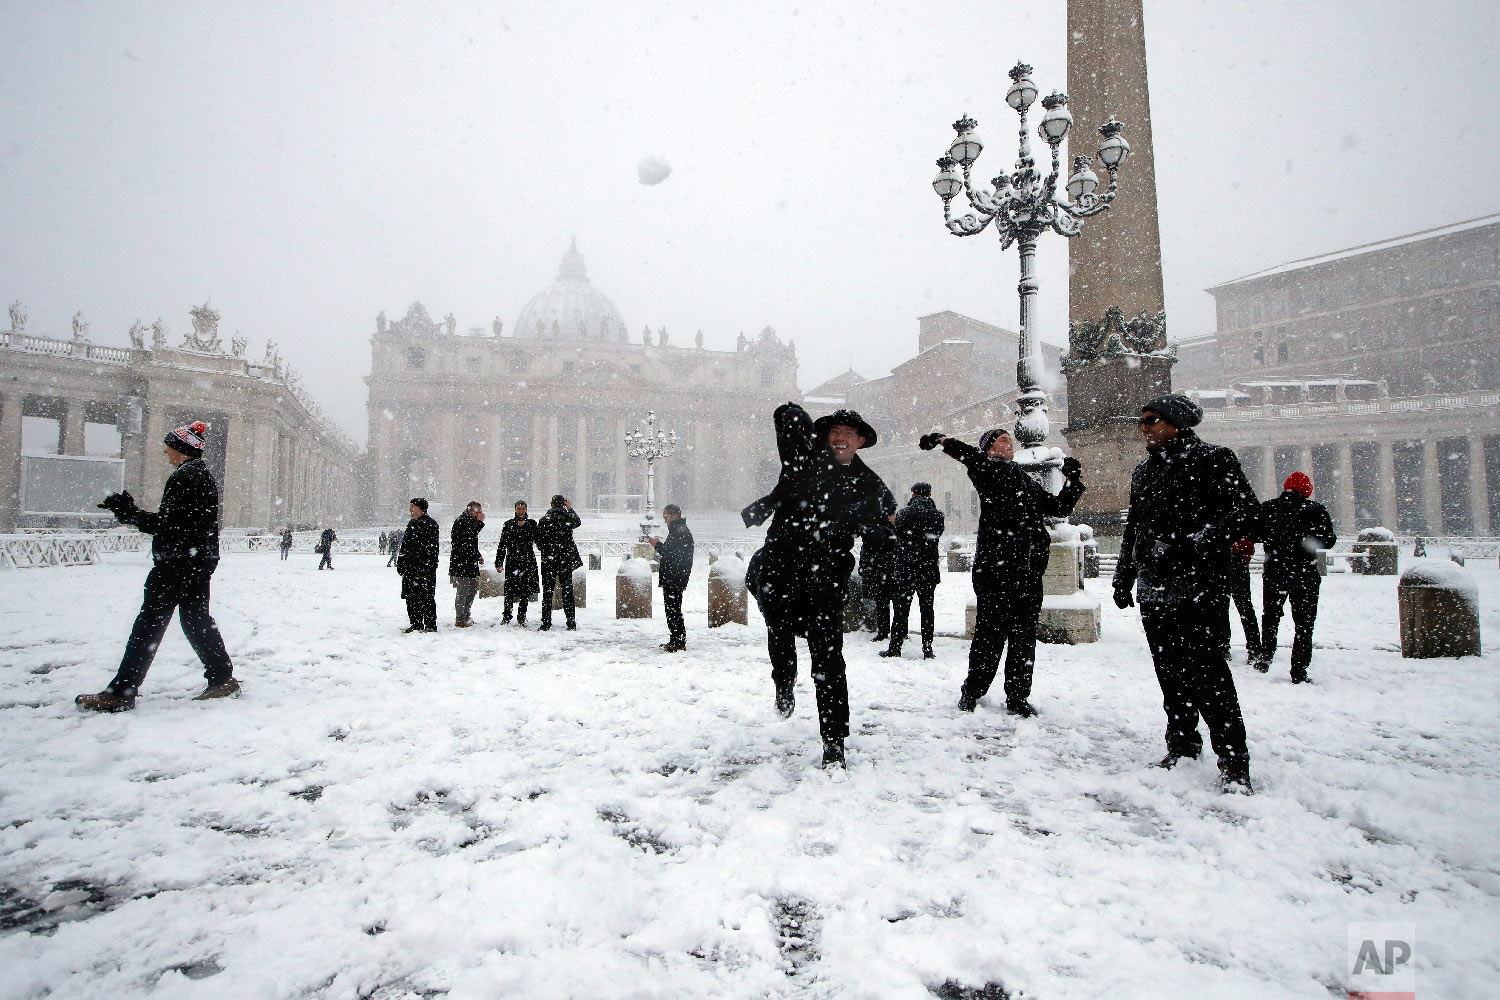  Shawn Roser, from Venice, Florida, a student at the North American college in Rome, throws a snowball as he plays in a snow blanketed St. Peter's Square, at the Vatican on Feb. 26, 2018. (AP Photo/Alessandra Tarantino) 